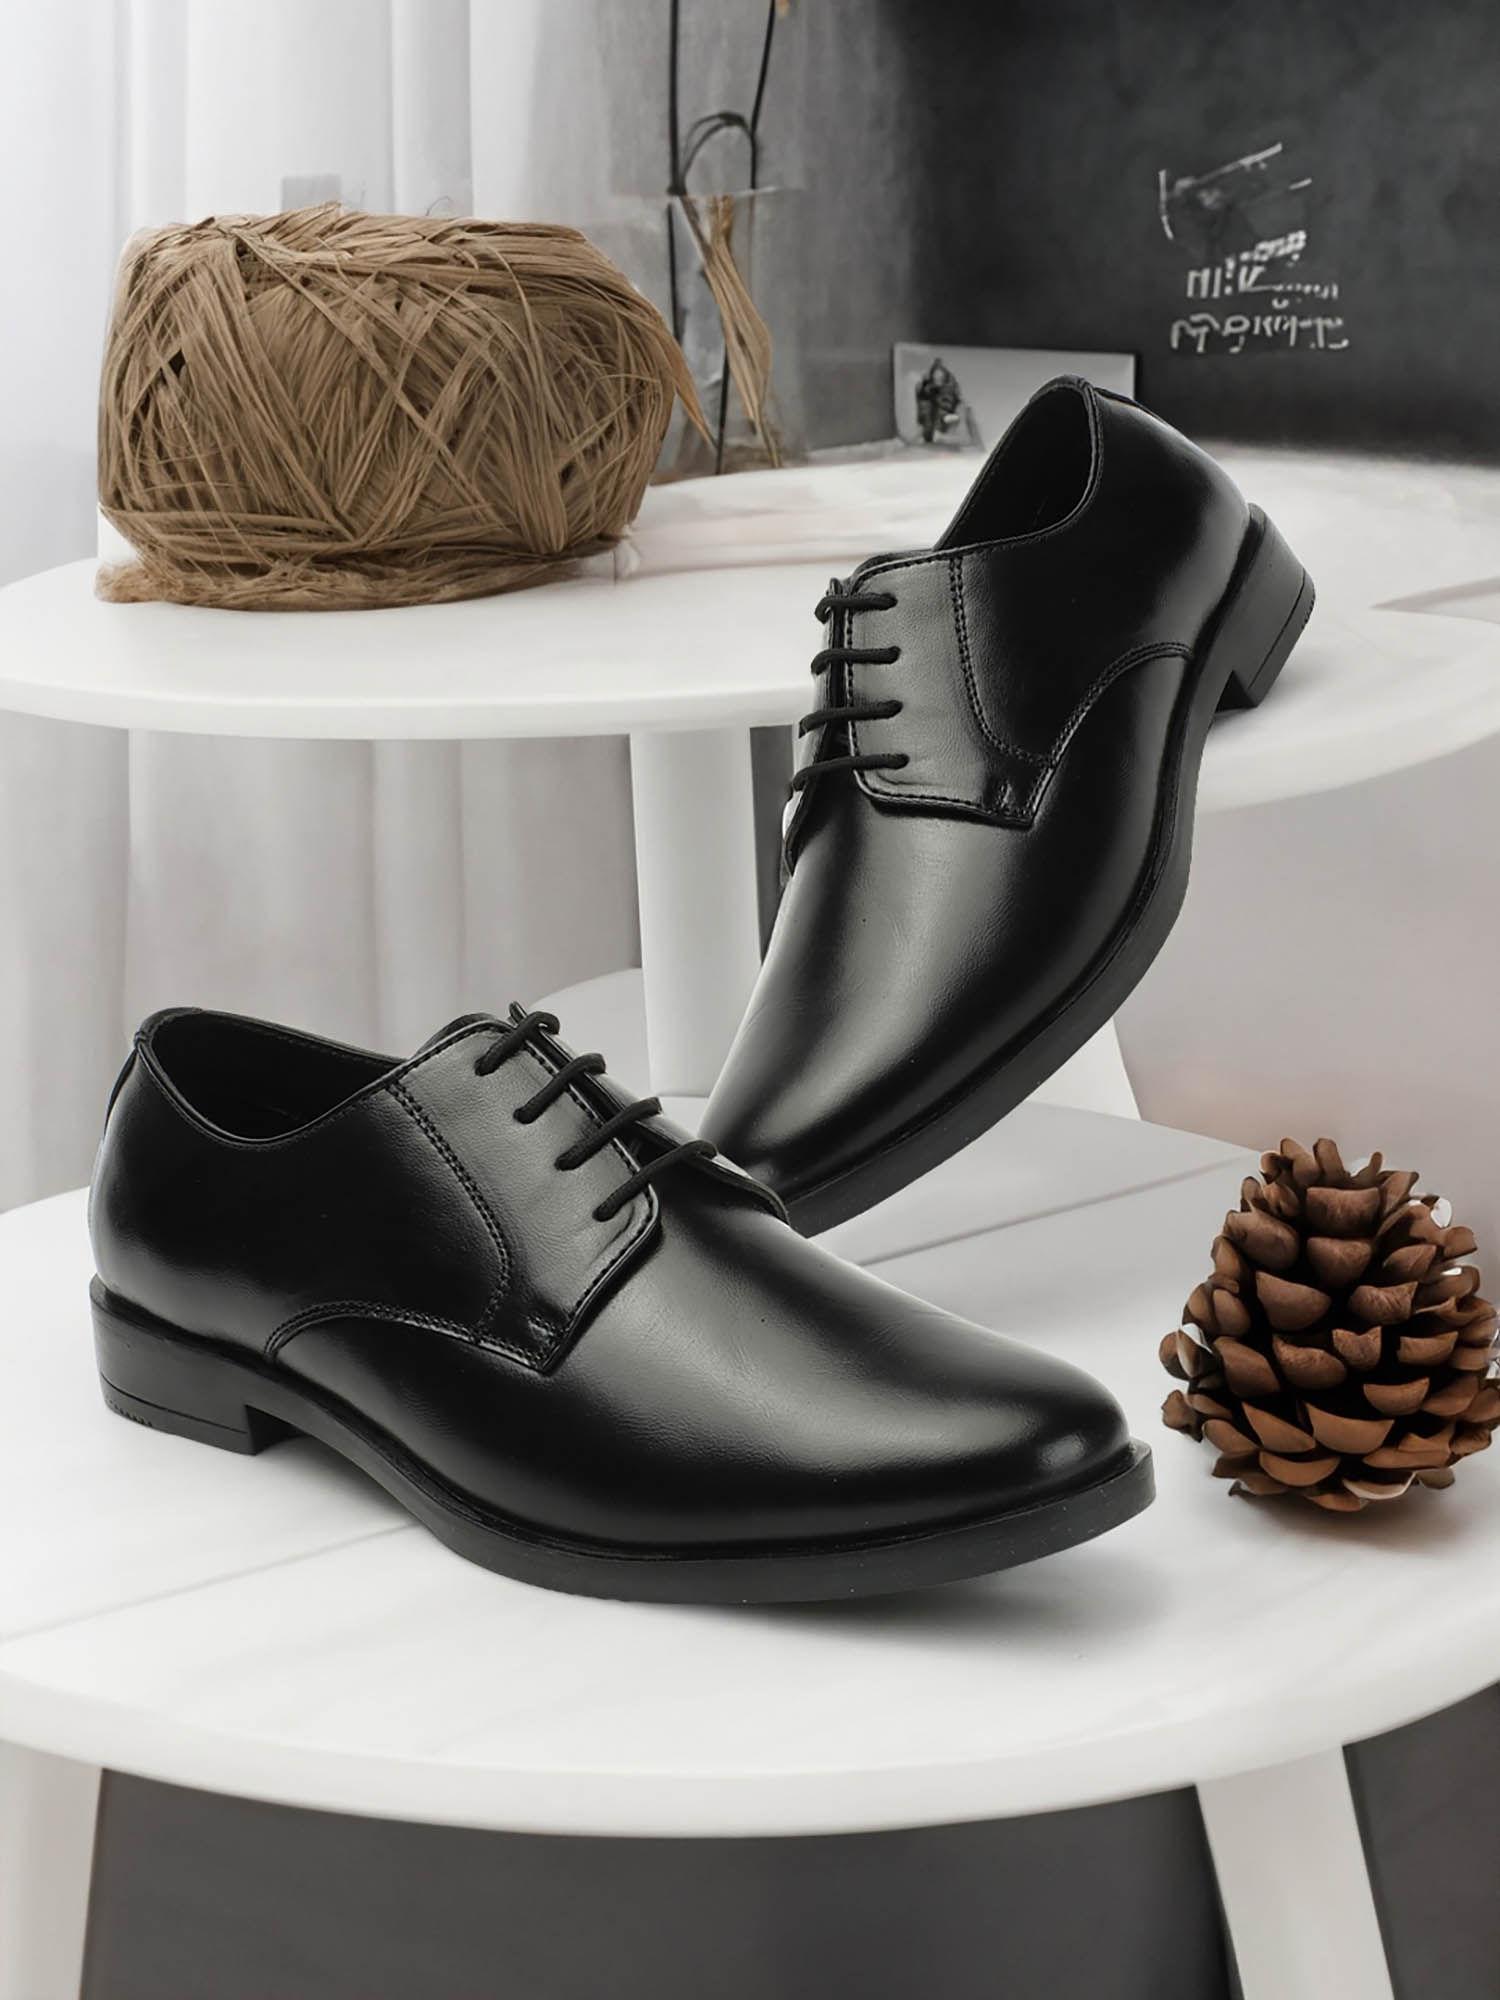 mens-stylish-black-color-formal-lace-ups-leather-oxfords